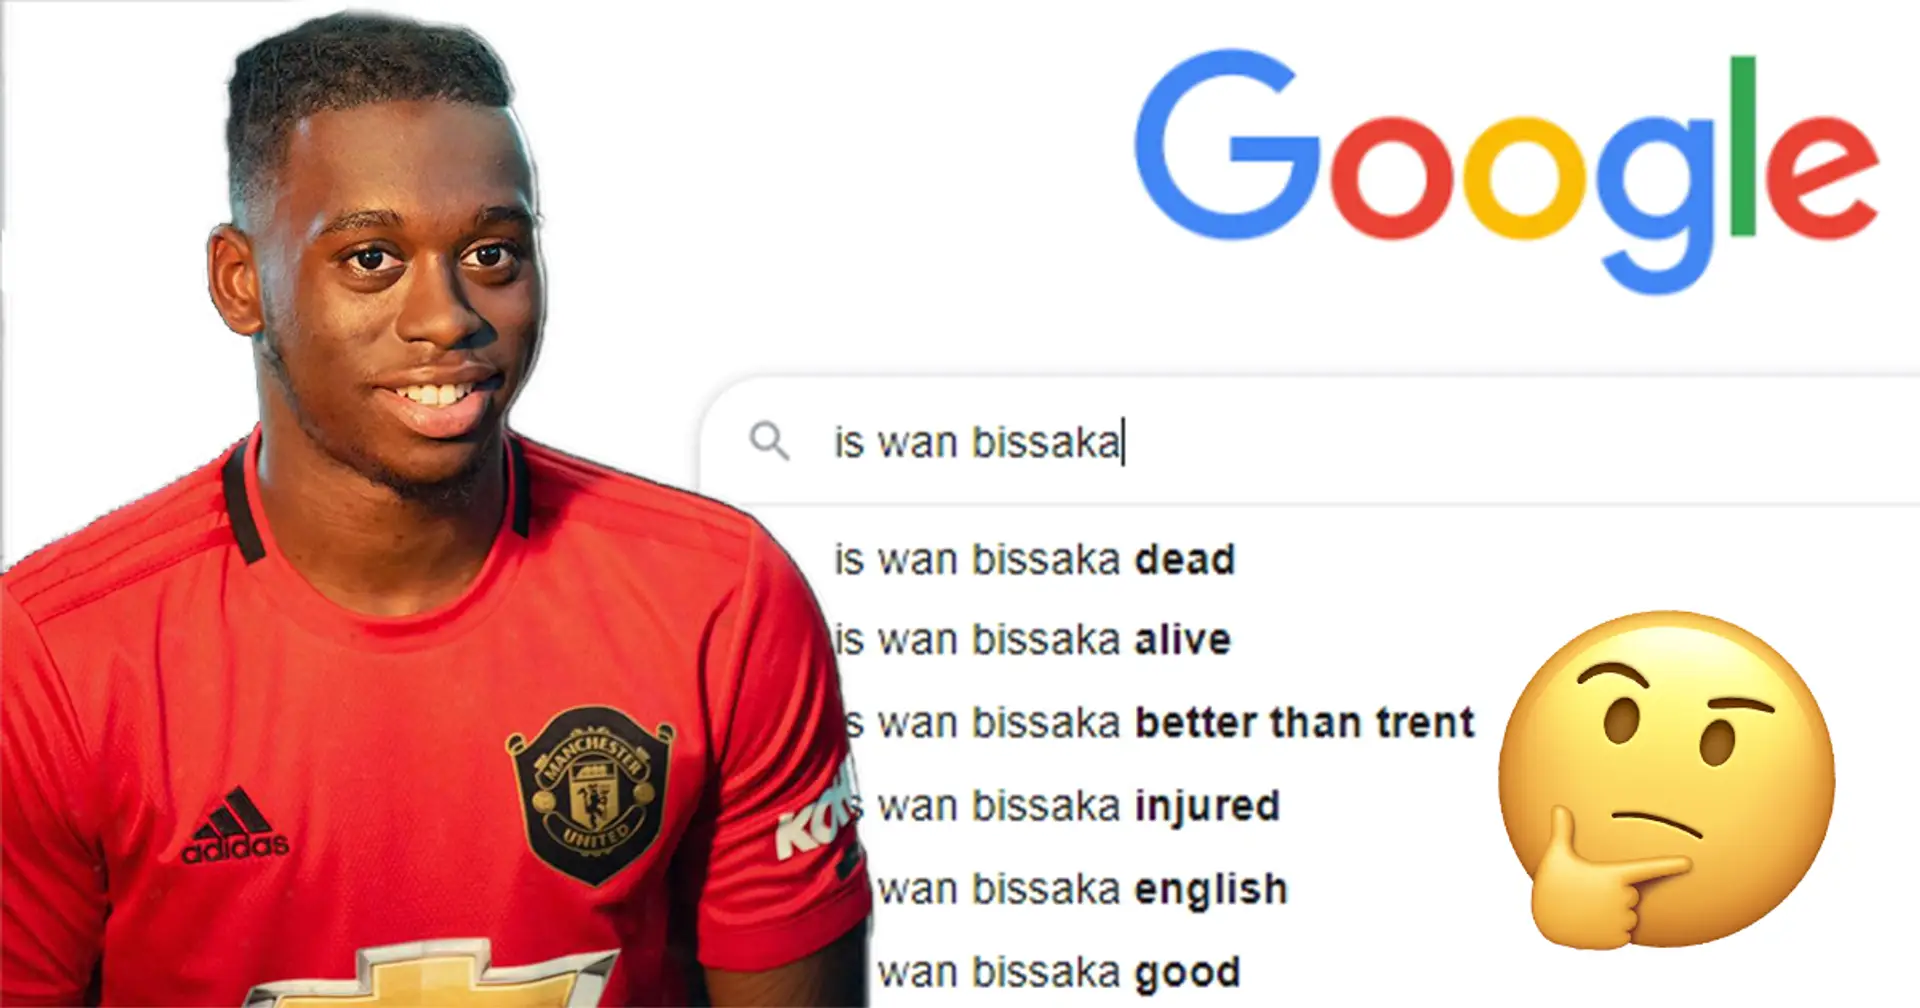 Is Wan-Bissaka playing today? Answering top 10 Google searches about United's Spider Man